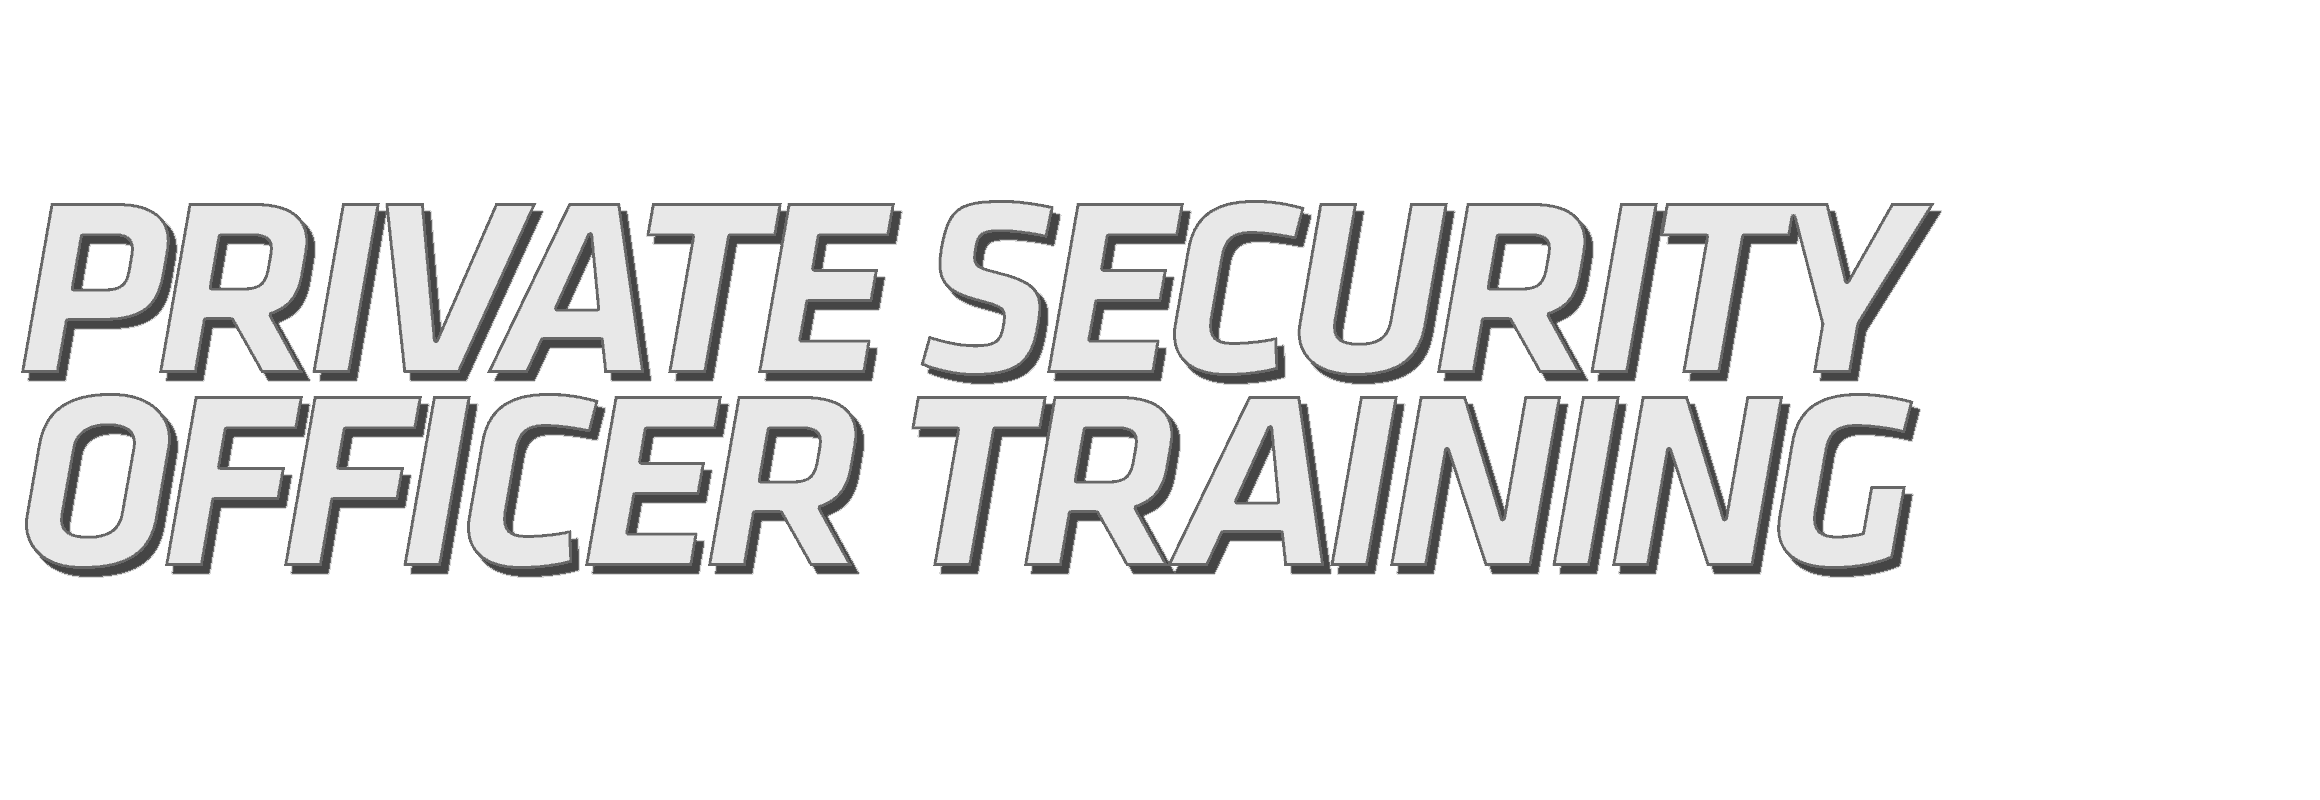 Private Security Officer Training